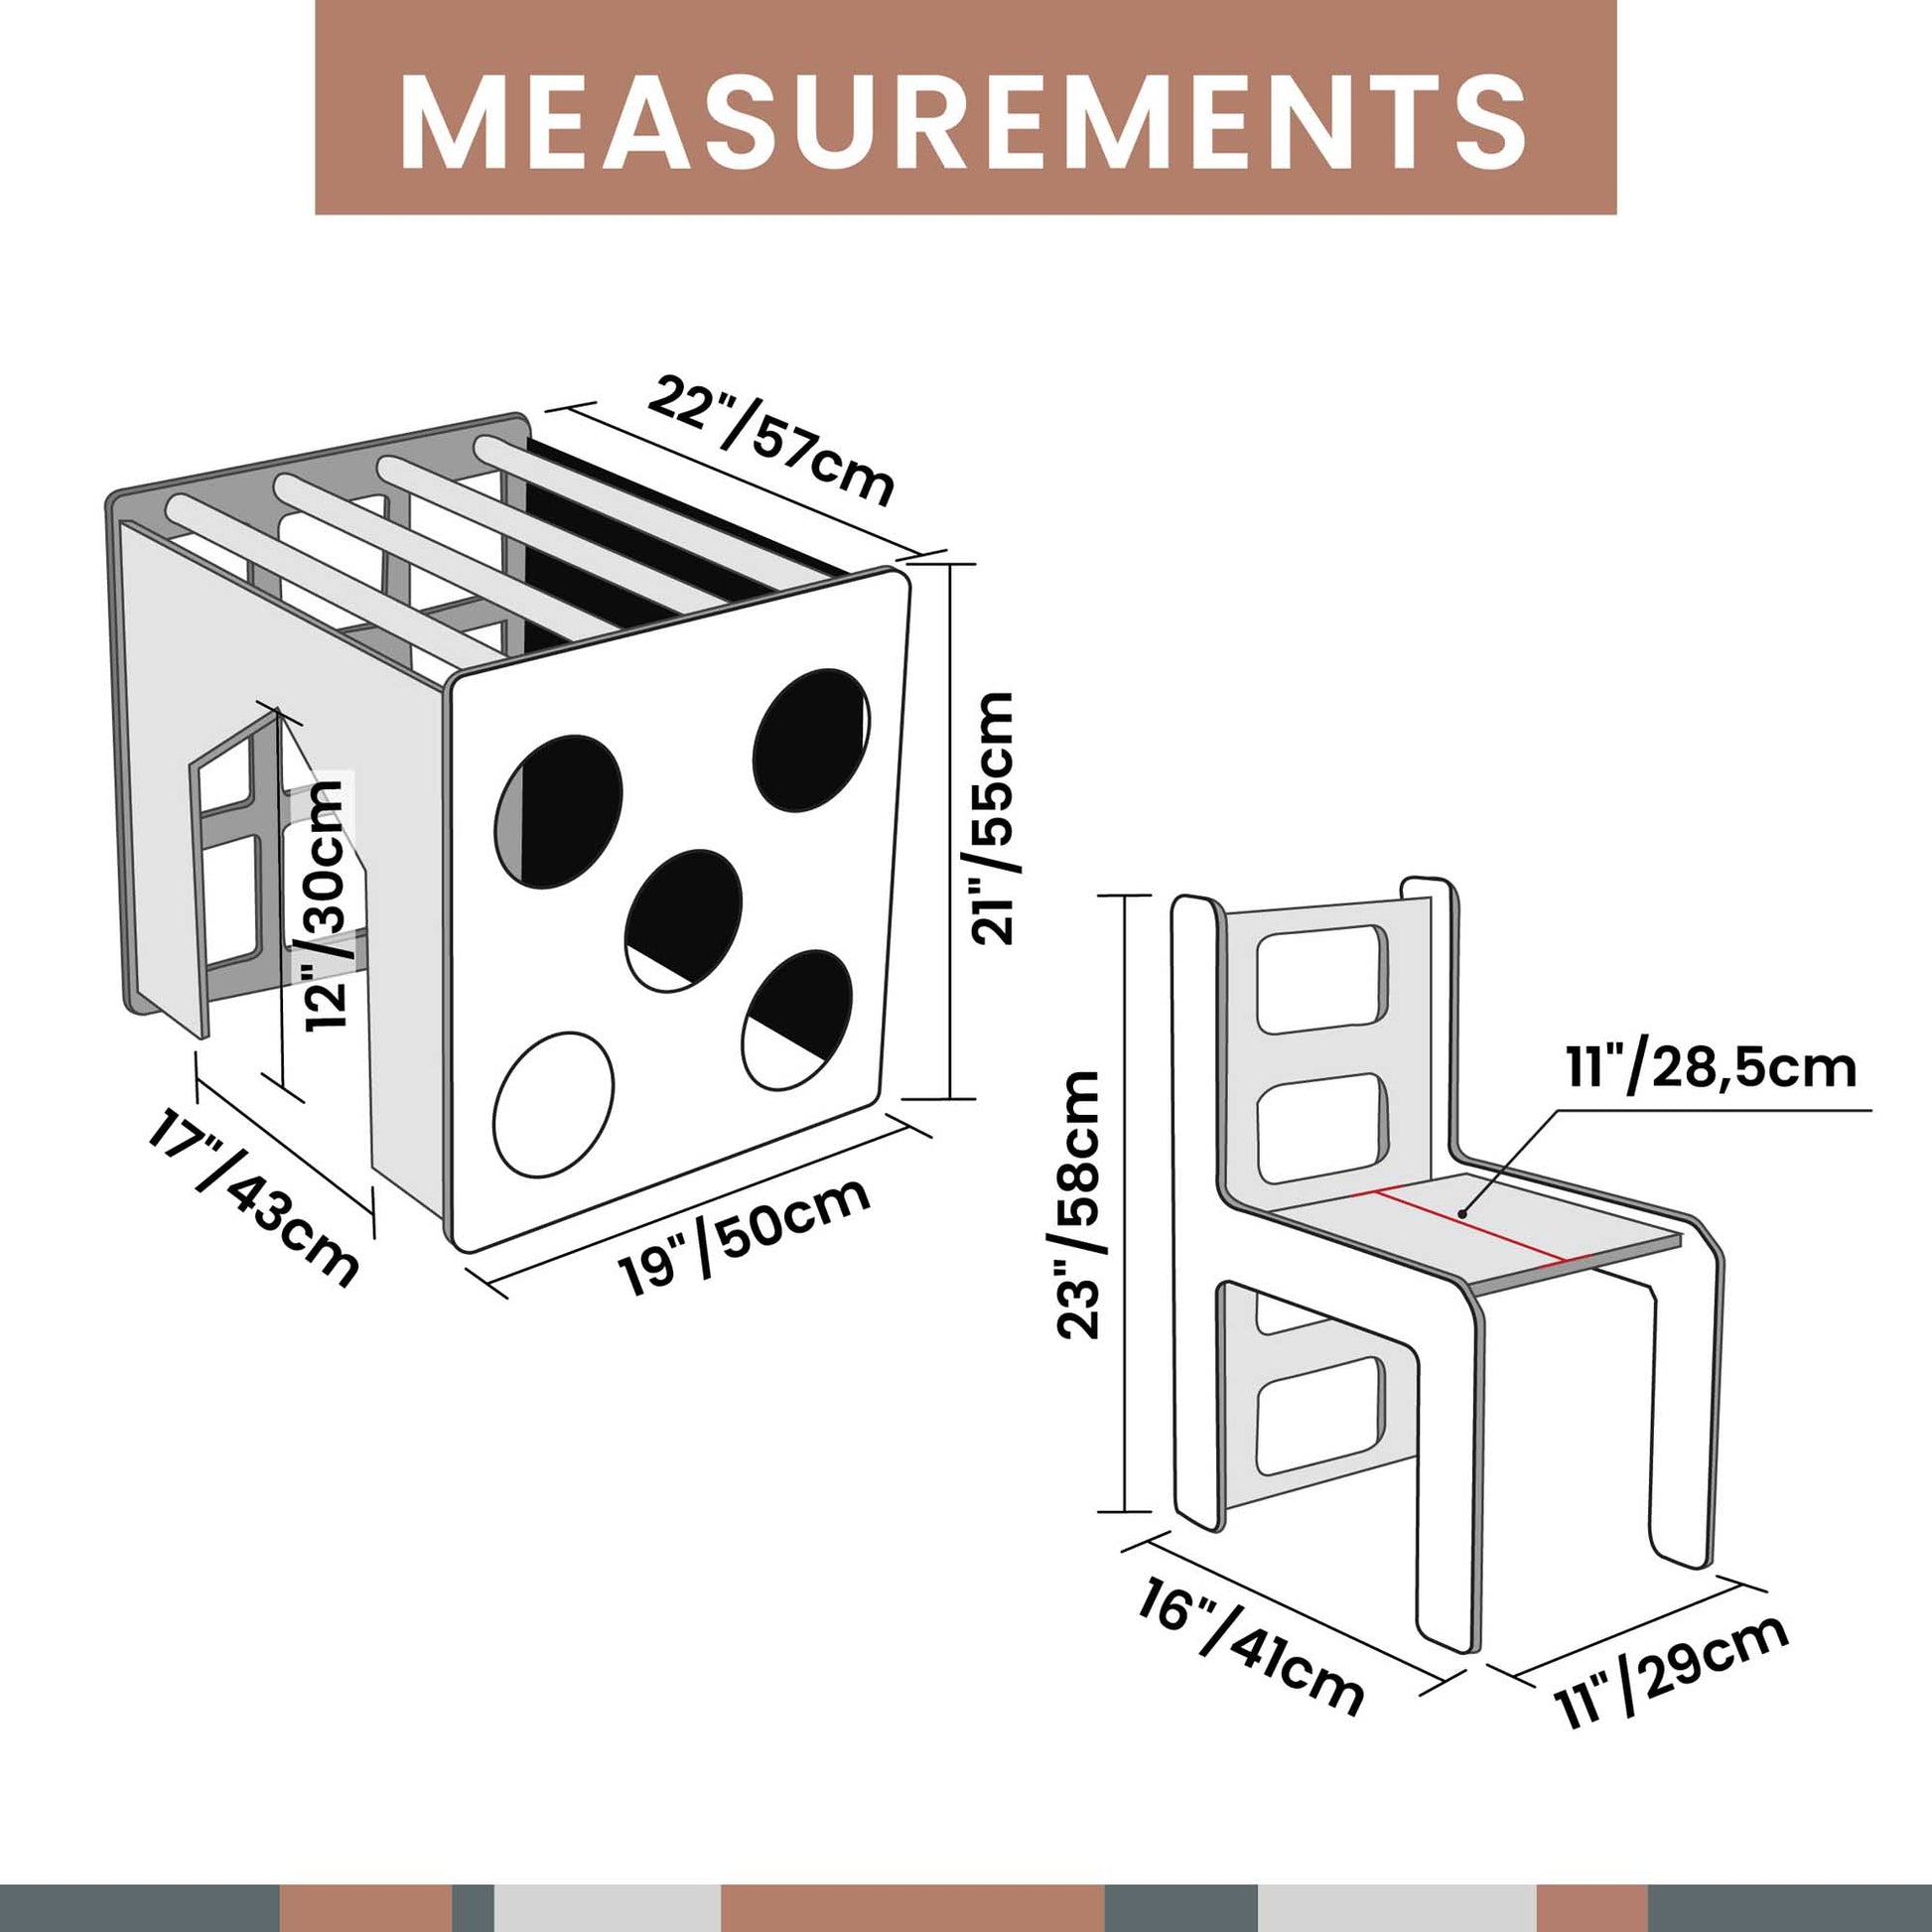 A diagram showing the measurements of a Climbing arch + Transformable climbing cube / table and chair  + a ramp.